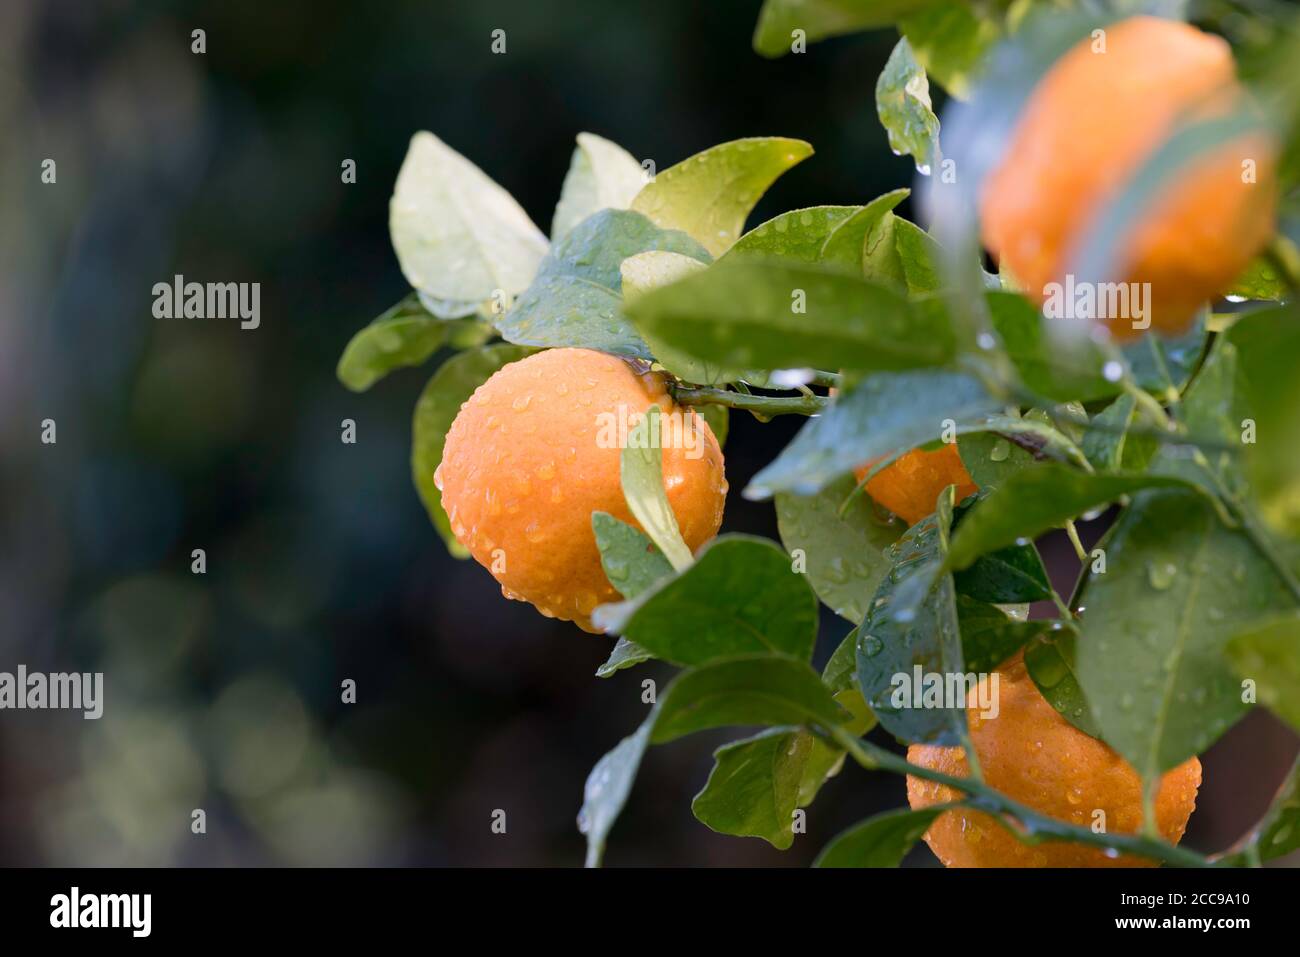 After a morning winter shower water droplets cling in the sunlight to juicy ripe mandarins (Citrus reticulata) on a backyard citrus tree in Sydney Stock Photo